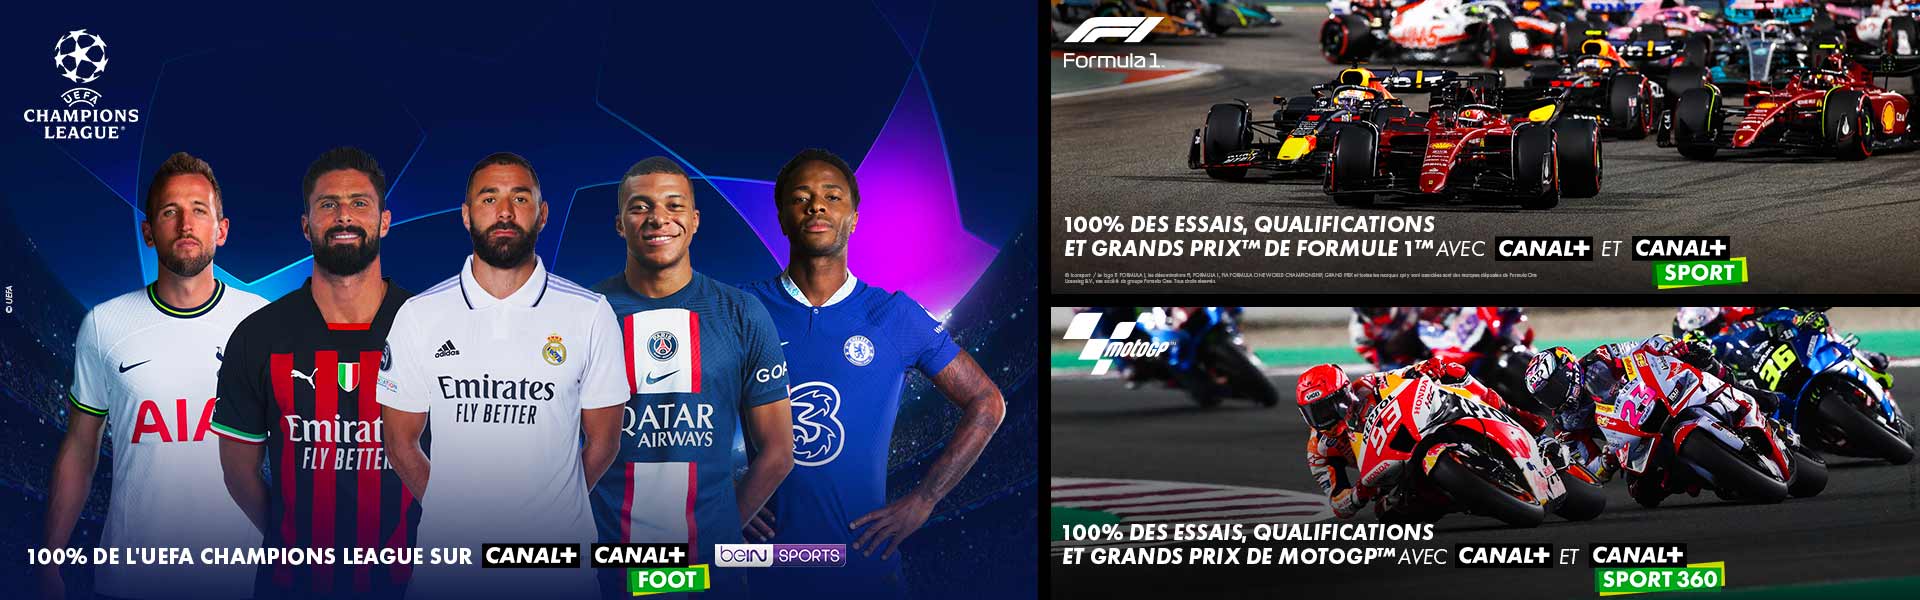 CANAL PLUS SPORT